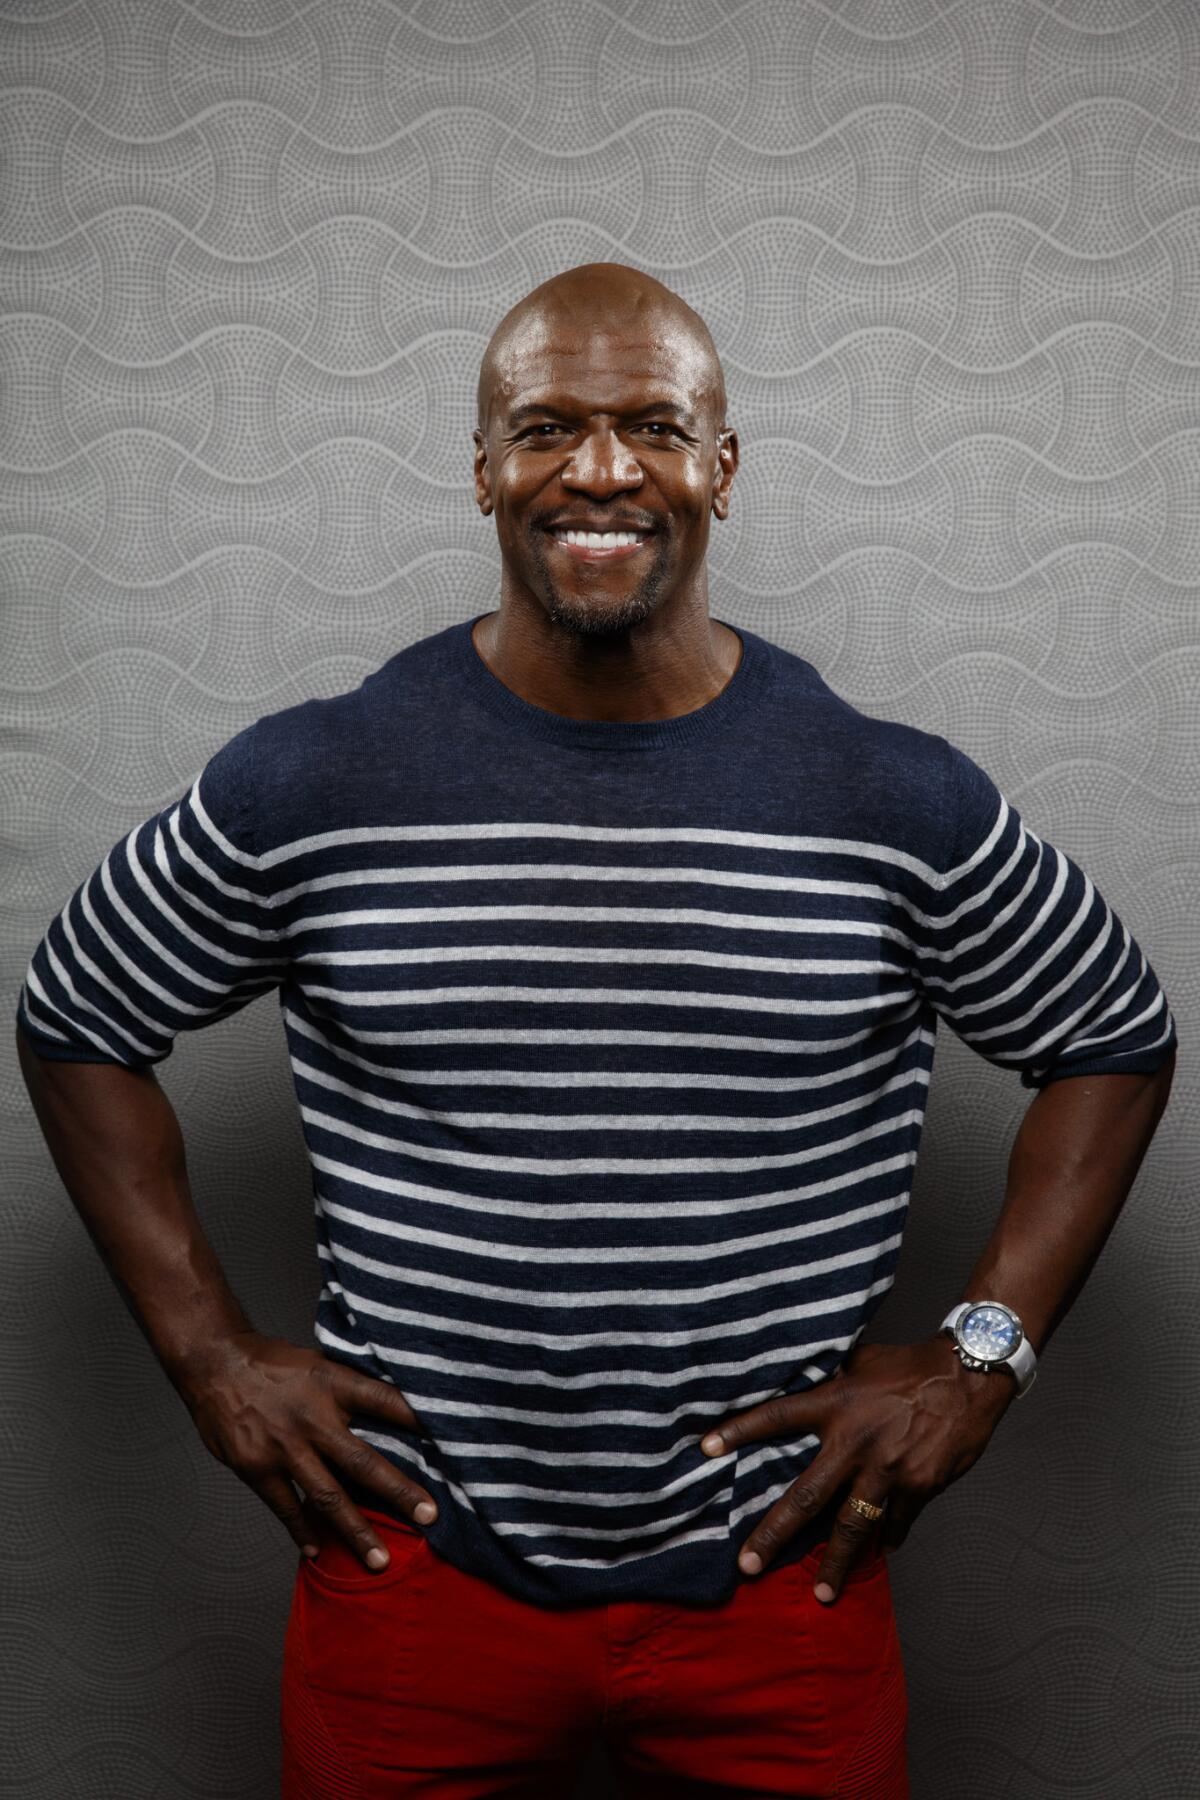 Terry Crews from the television show "Brooklyn Nine-Nine."